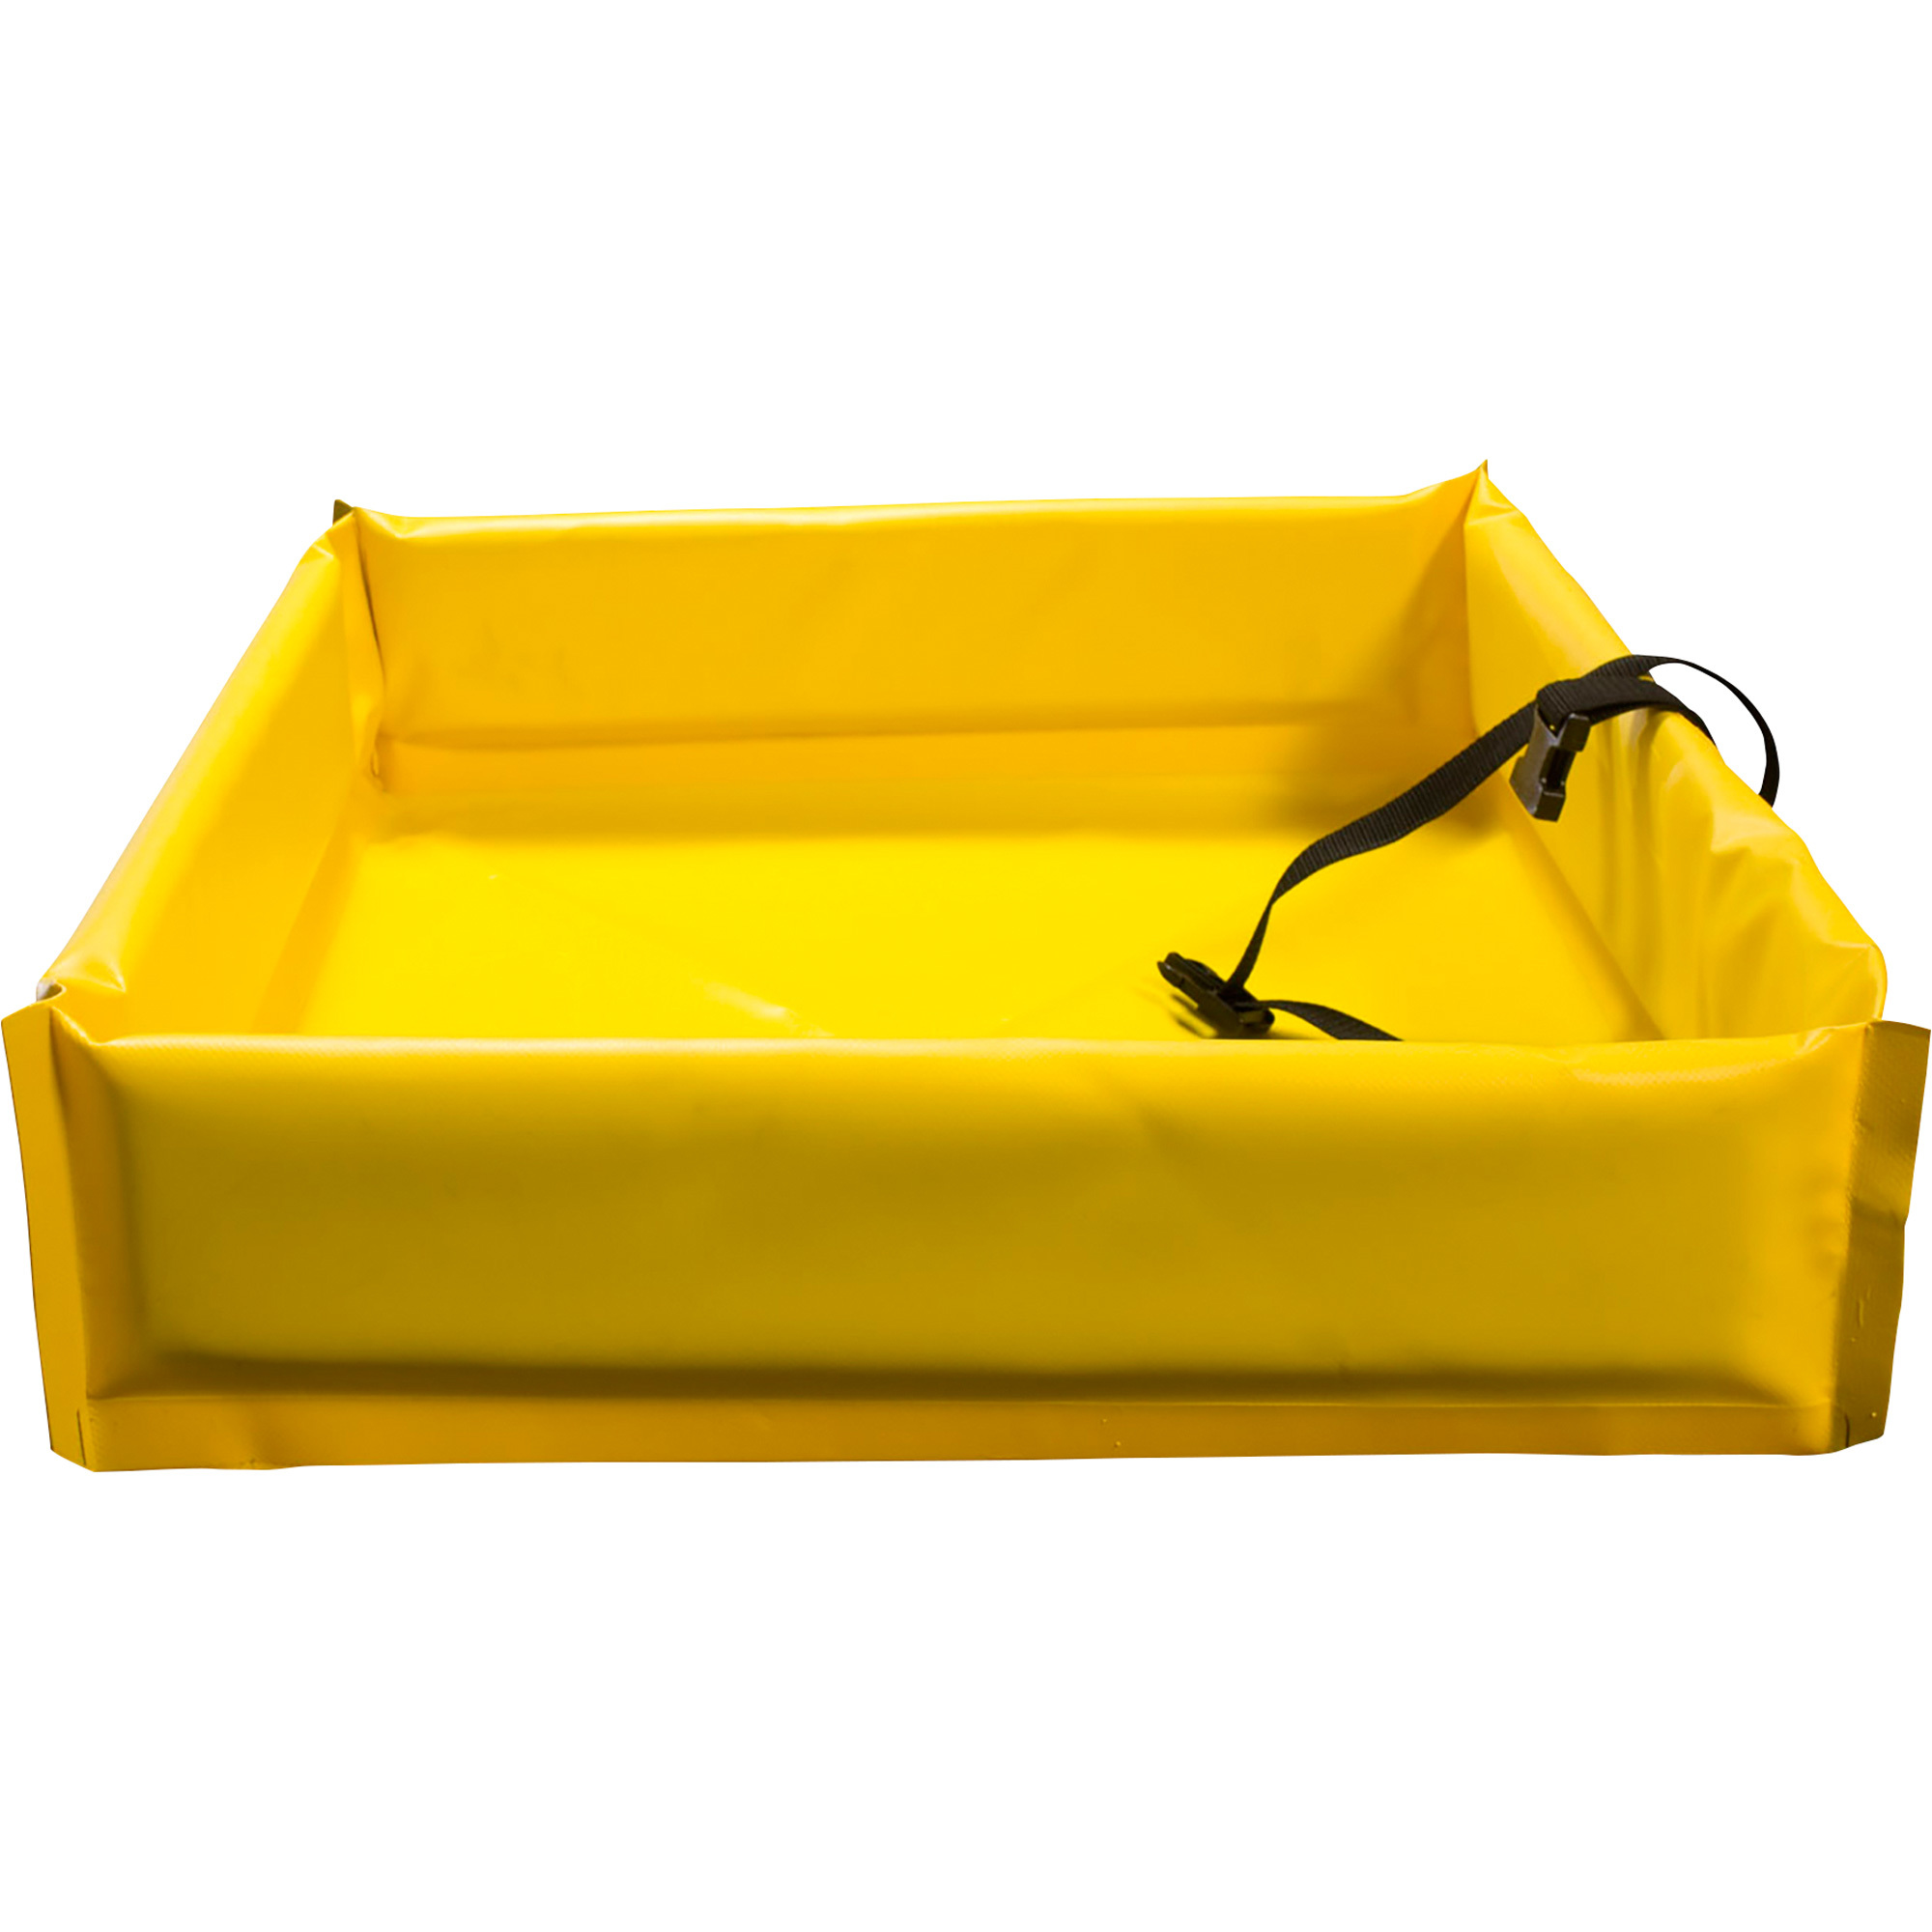 Impact Absorbents Portable Spill Containment Berm â 15-Gal. Capacity